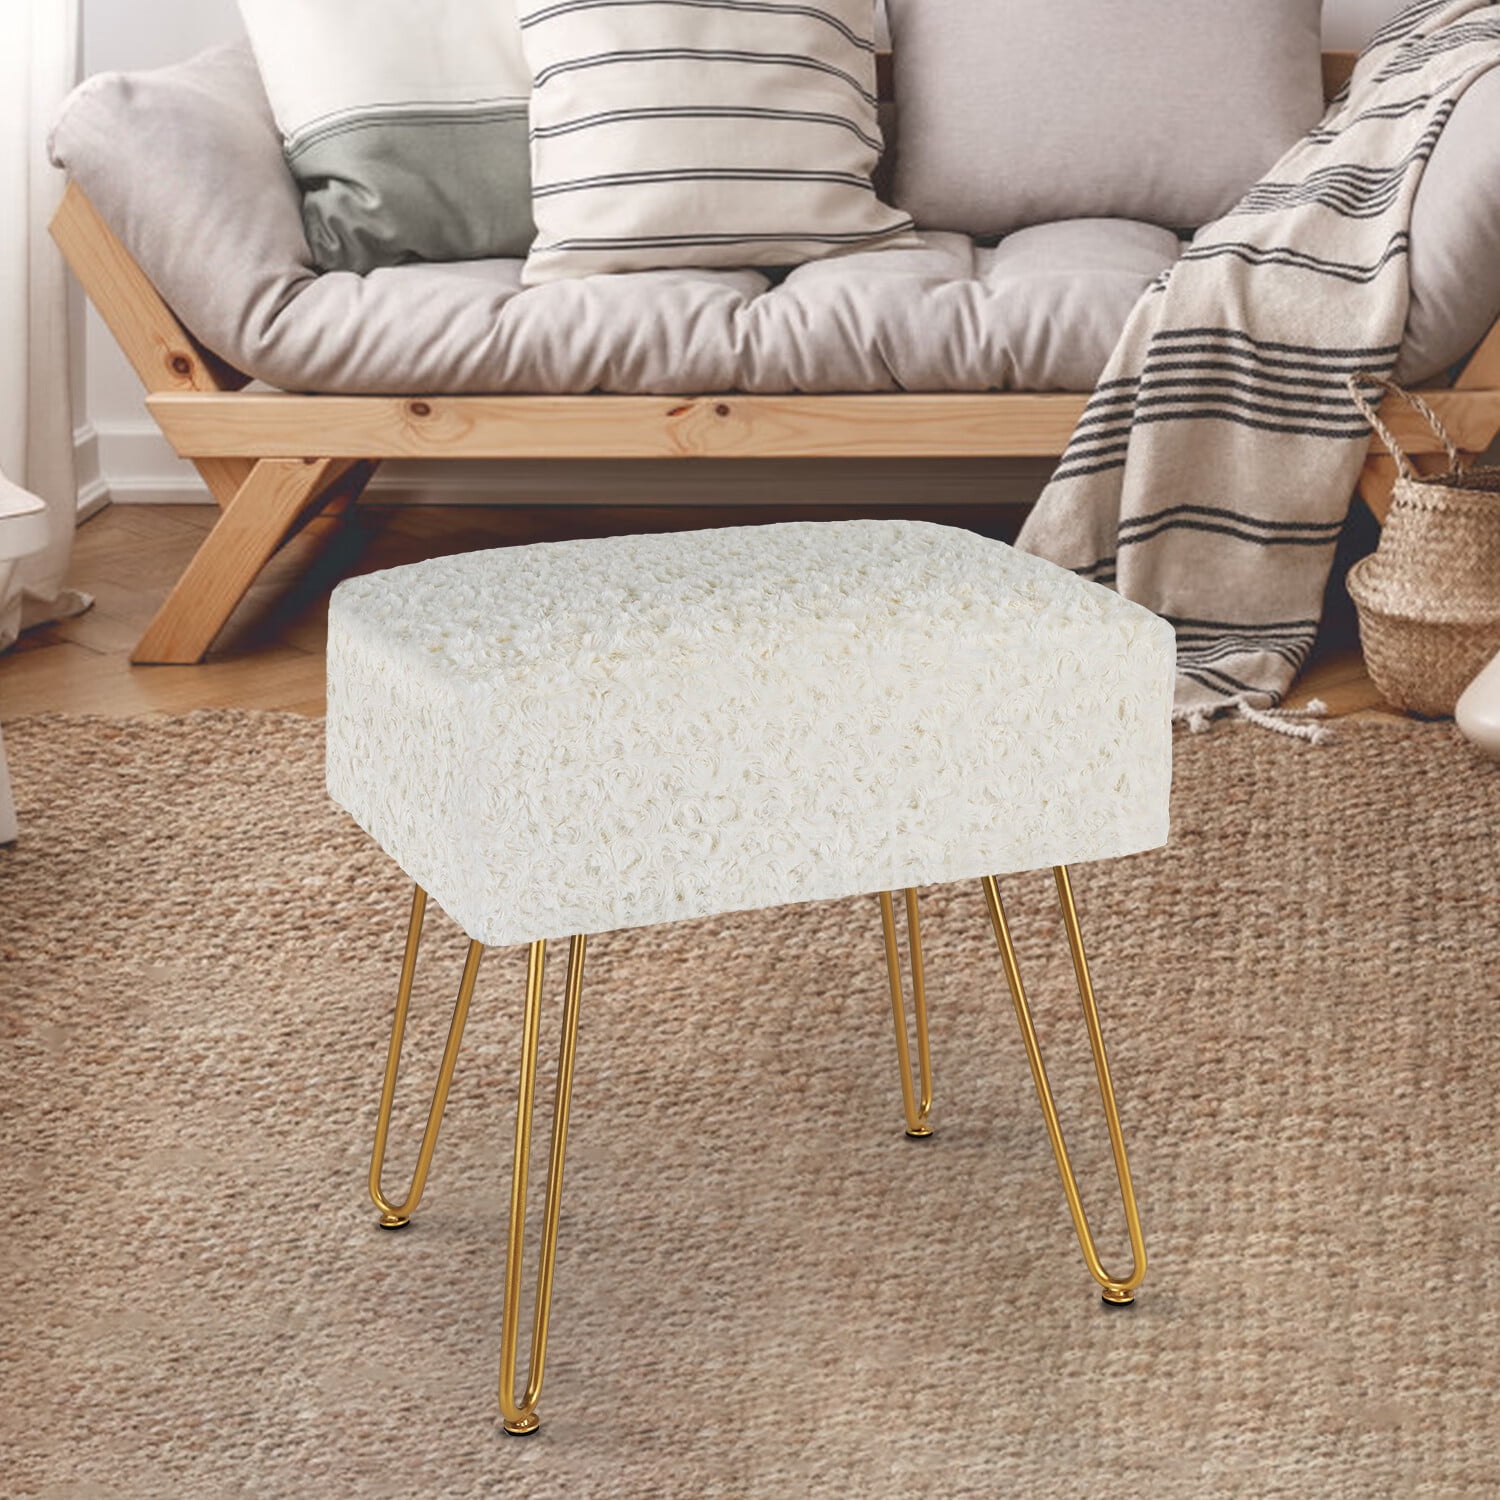 CPFurnitureStar Small Footstool Ottoman Velvet Soft Footrest Ottoman with  Wood Legs Sofa Footrest Extra Seating for Living Room Entryway Bedroom